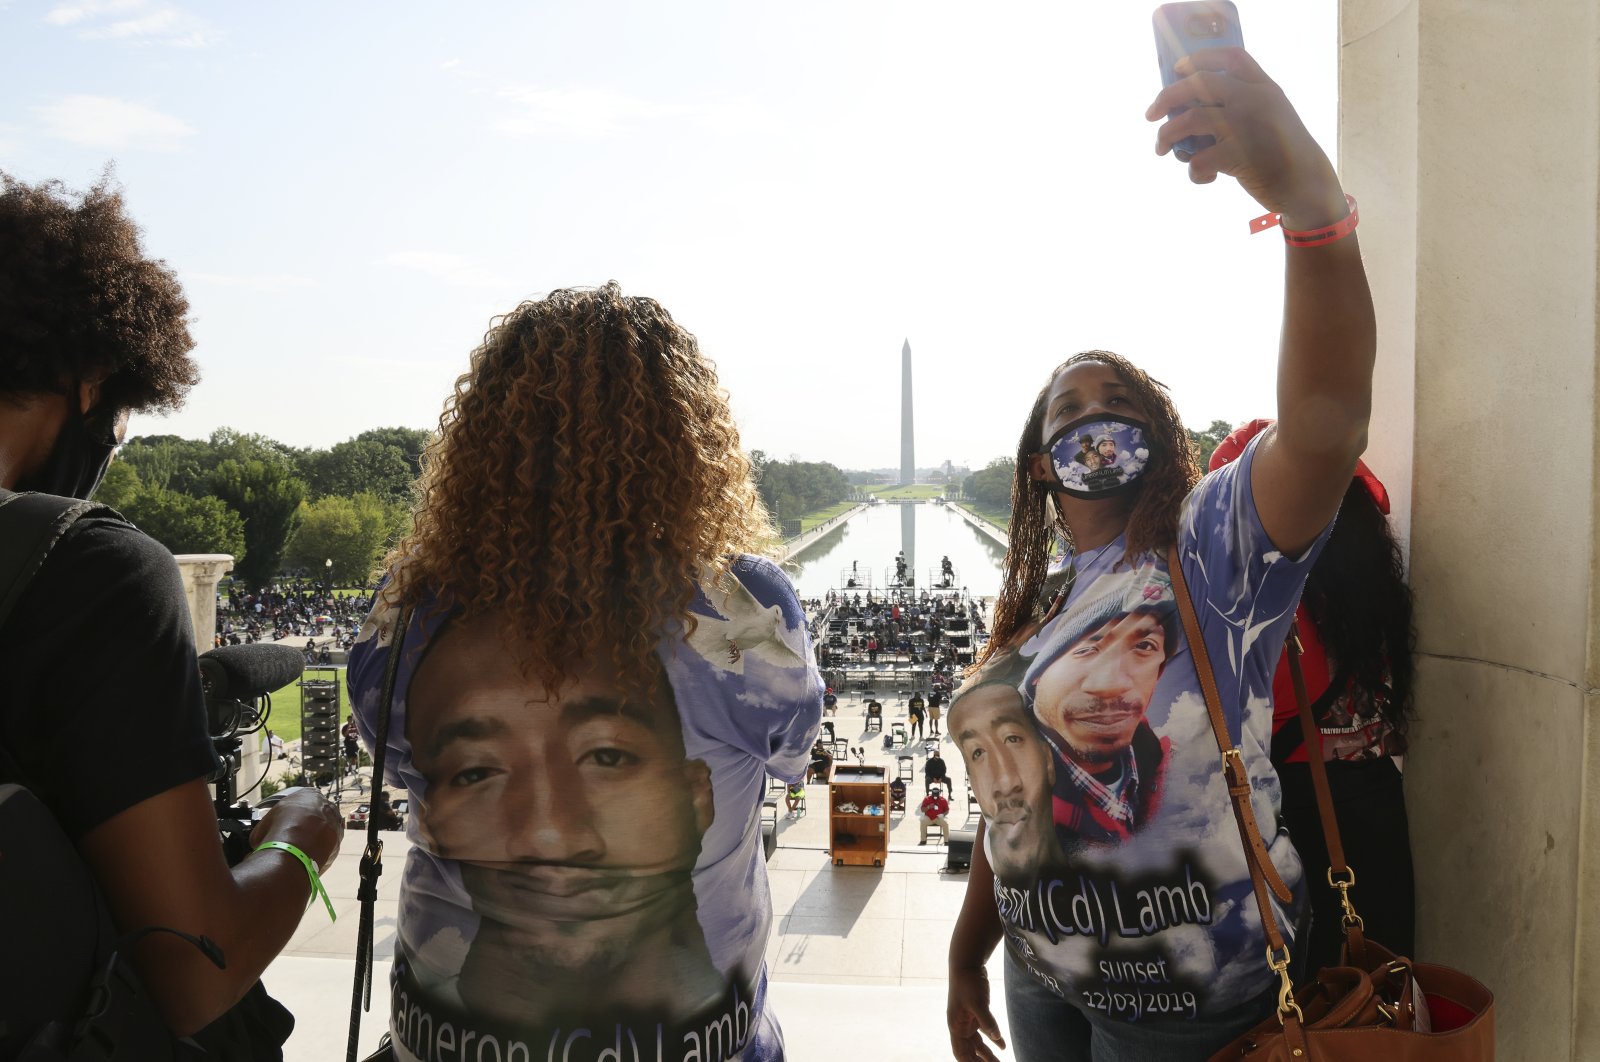 Laurie Bey (R) whose son Cameron Lamb was shot and killed by Kansas City police in 2019, stands with Merlon Ragland, Cameron's aunt, as demonstrators gather at the Lincoln Memorial as final preparations are made for the March on Washington, Washington, D.C., the U.S., Aug. 28, 2020. (AP File Photo)